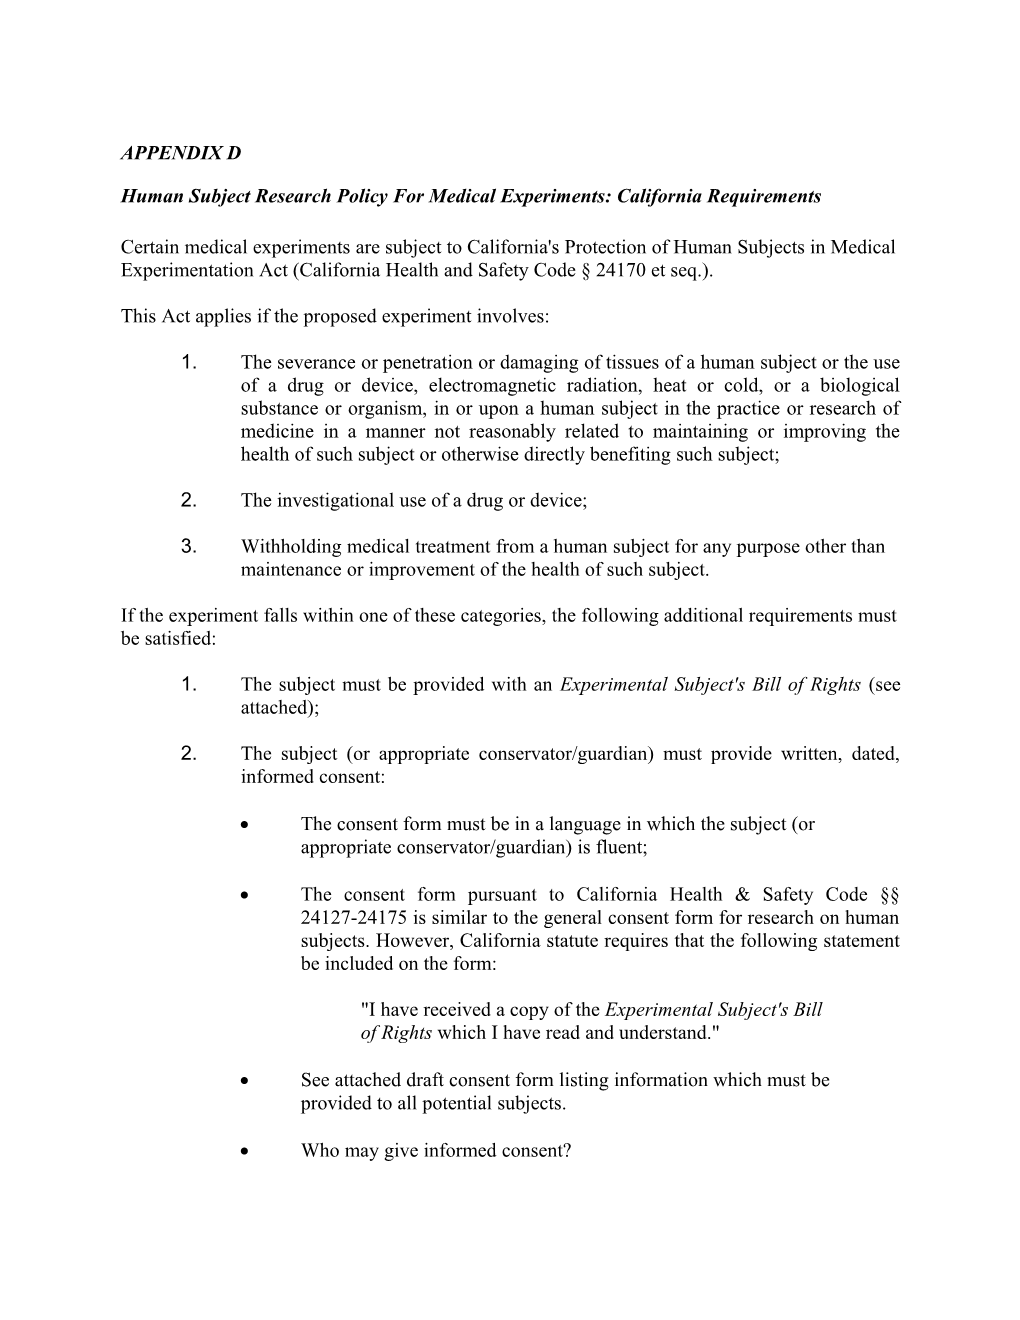 Human Subject Research Policy for Medical Experiments: California Requirements